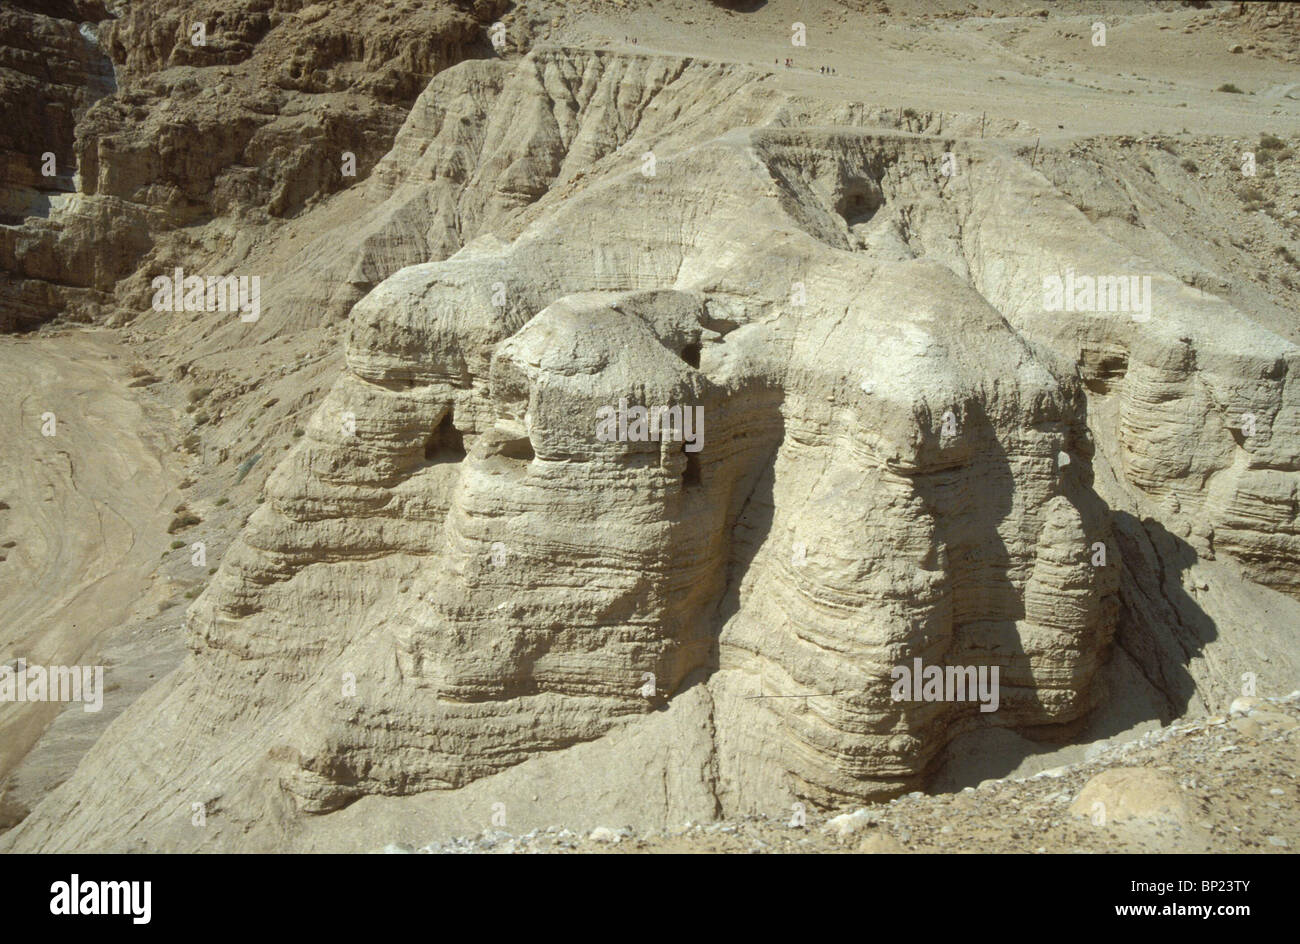 QUMRAN - SAND STONE FORMATIONS IN WHICH THE CAVE NO. 4 IS LOCATED. IN CAVE NO. 4 FIFTEEN-THOUSAND SCROLL FRAGMENTS HAVE BEEN Stock Photo